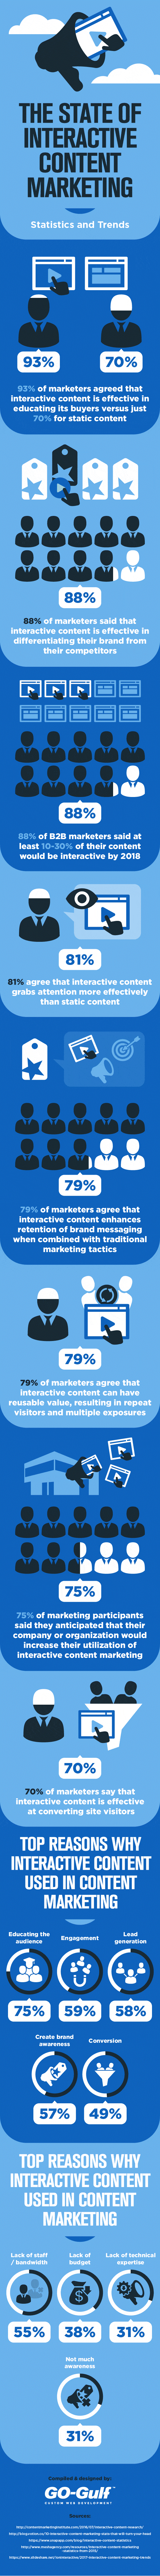 Is Interactive Content the Future of Content Marketing? [Infographic]